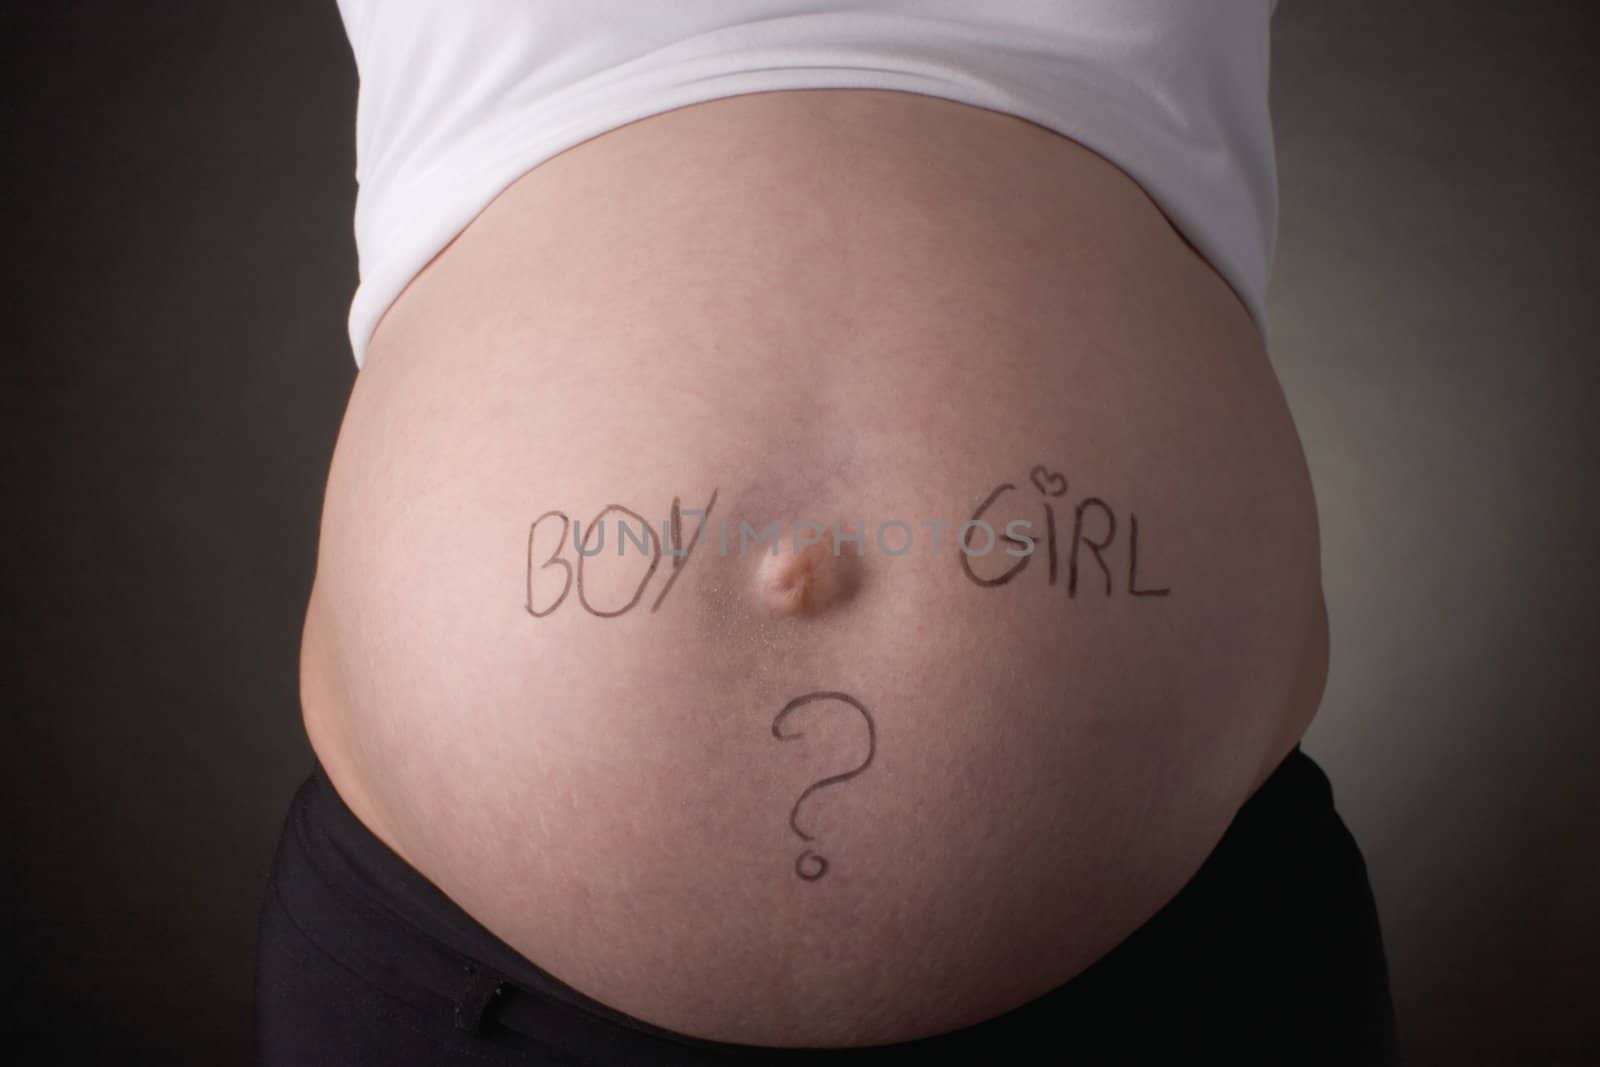 seven month old belly with the question boy or girl written on it